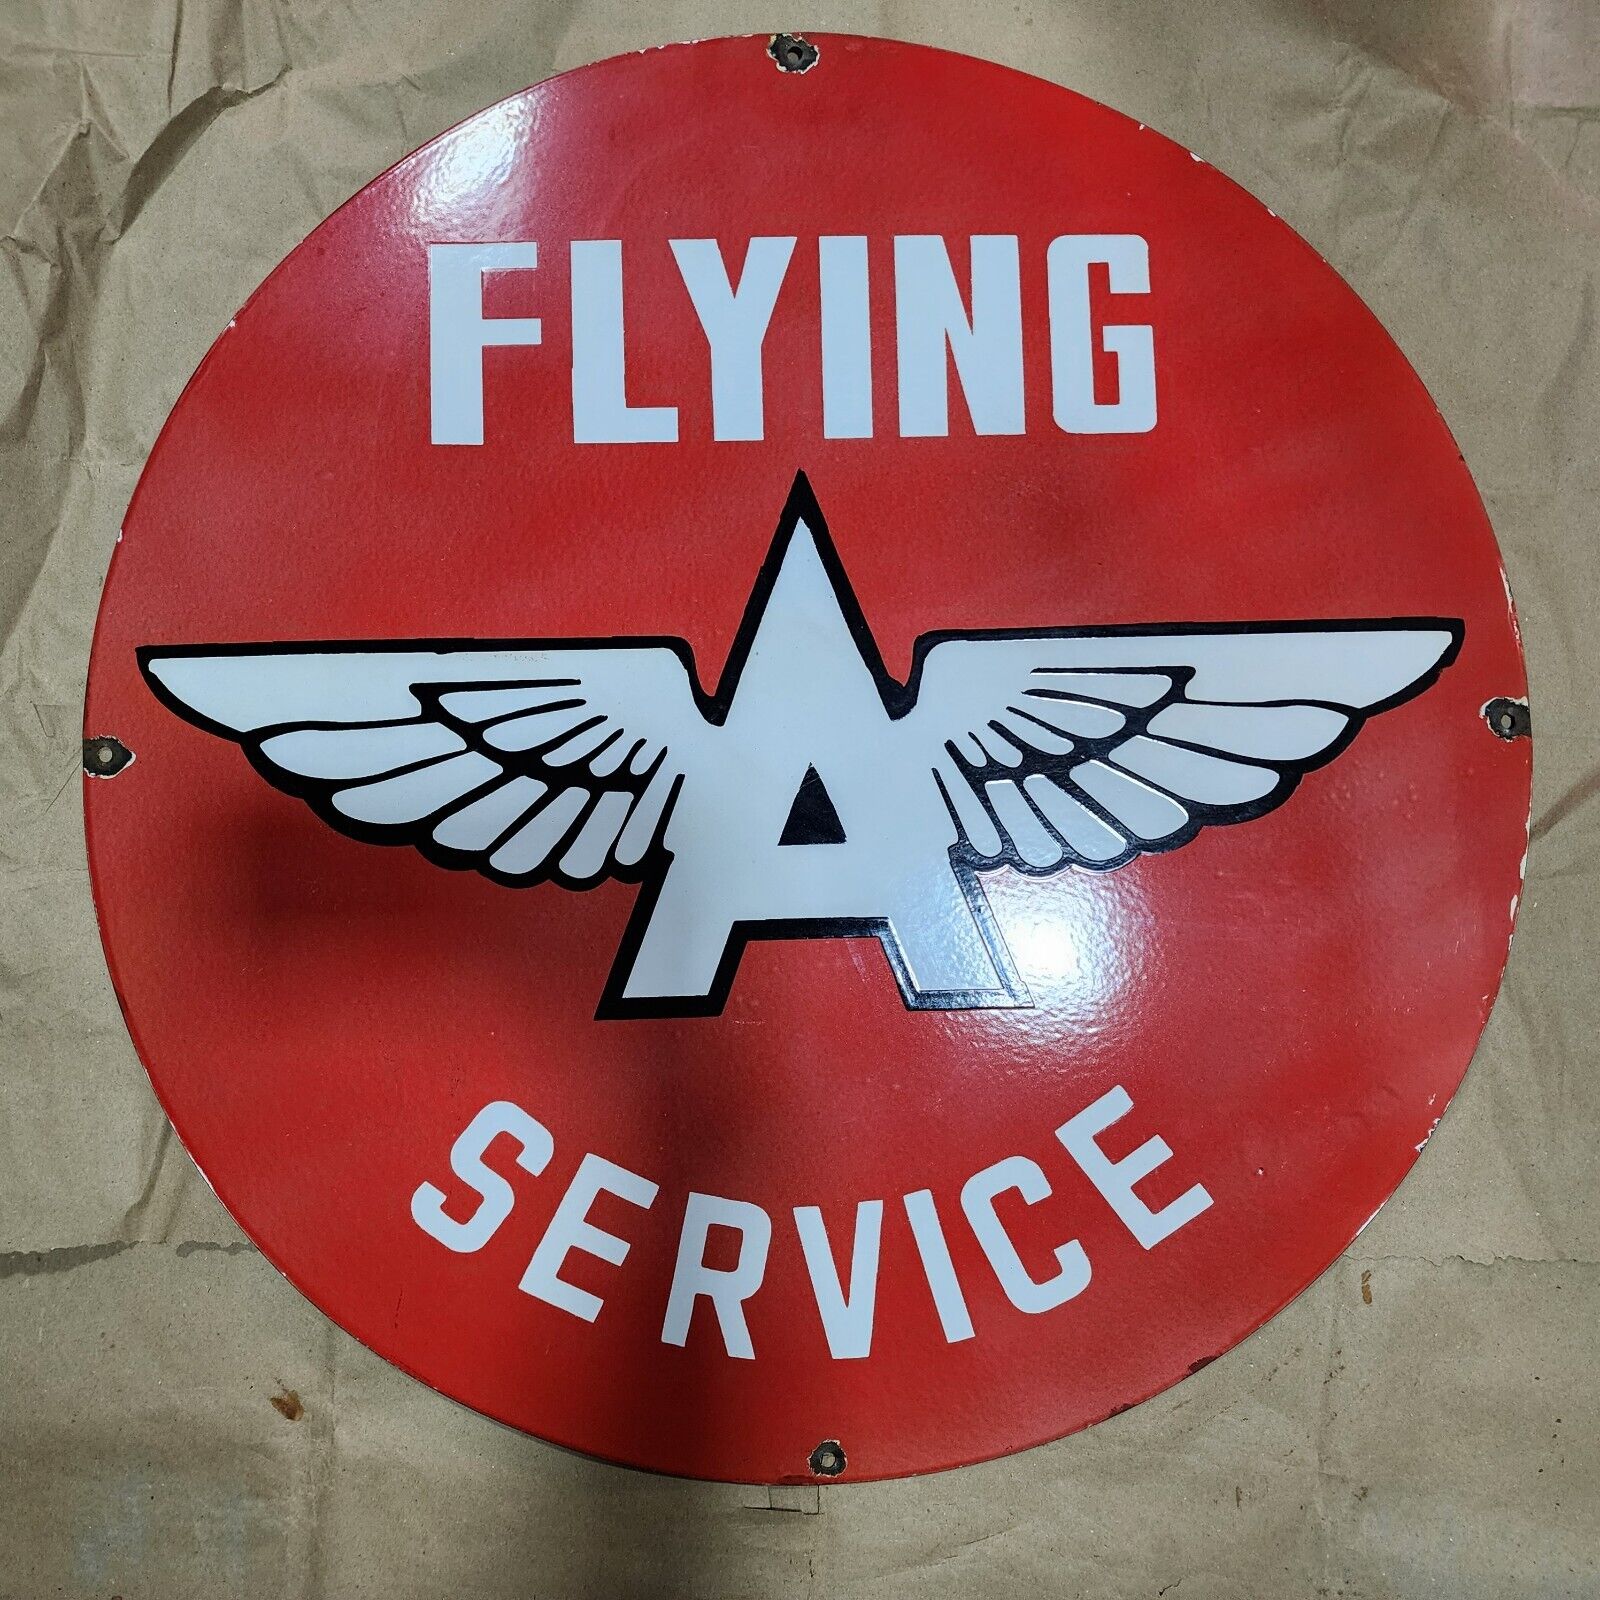 FLYING A SERVICE PORCELAIN ENAMEL SIGN 30 INCHES ROUND